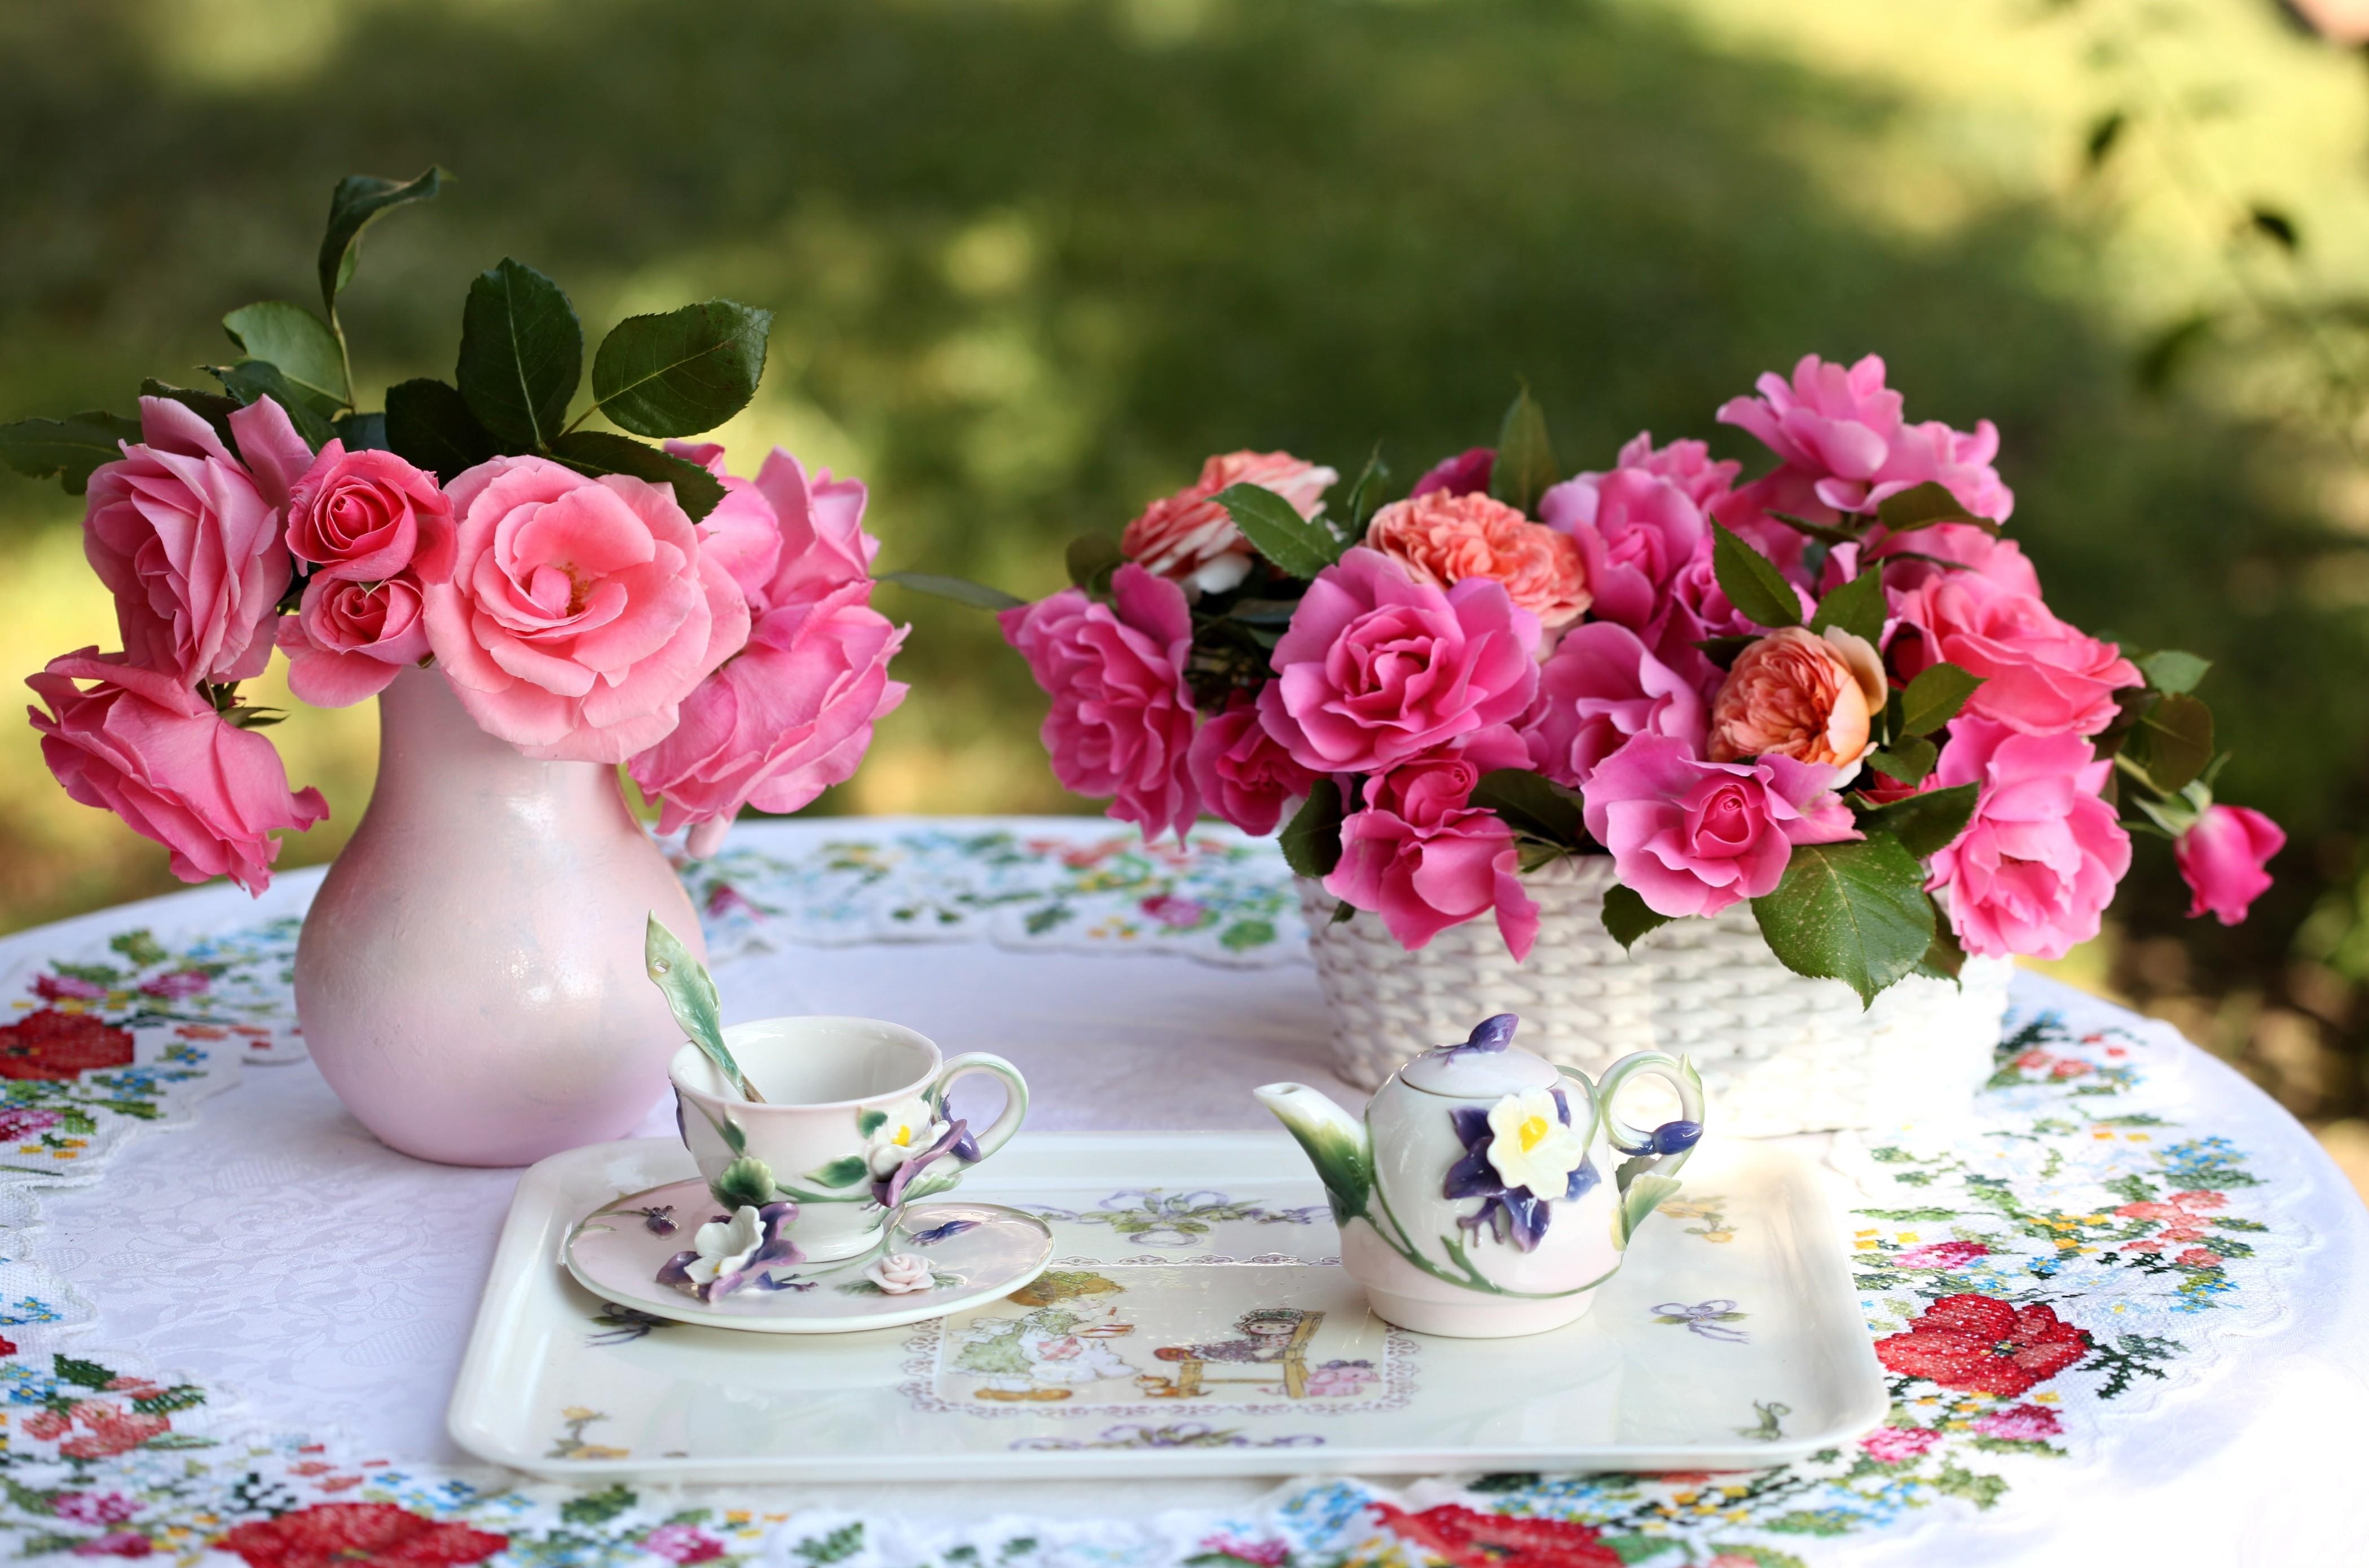 flowers, roses, bouquets, table, vase, basket, service, tea drinking, tea party, tablecloth